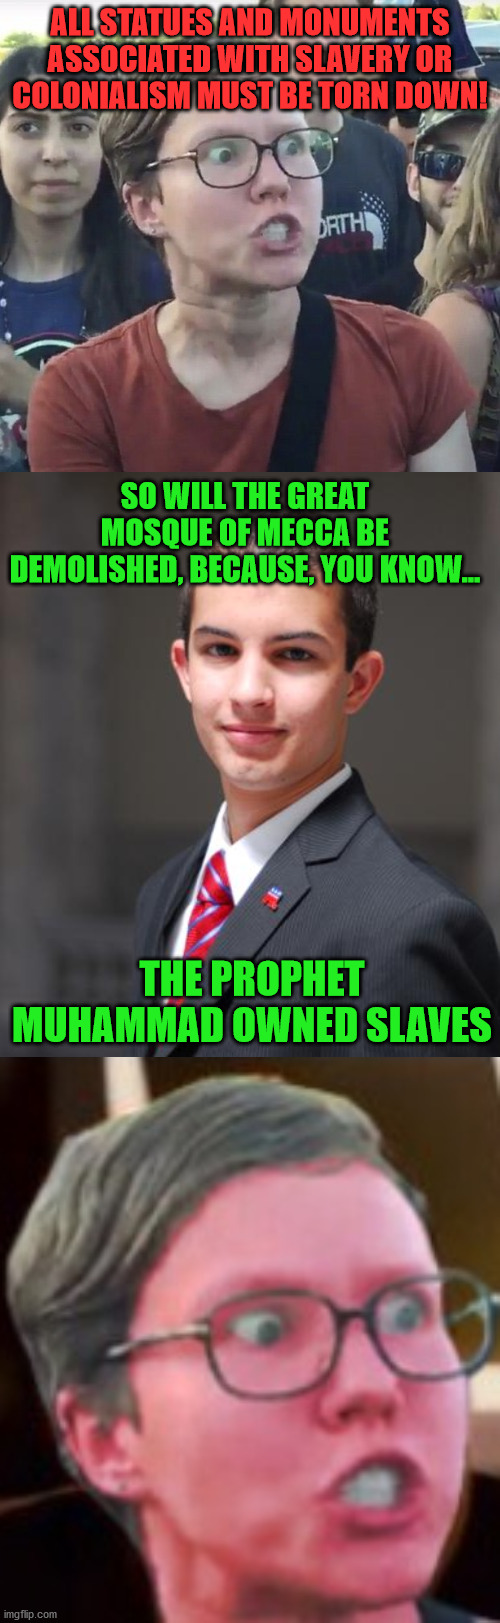 ALL STATUES AND MONUMENTS ASSOCIATED WITH SLAVERY OR COLONIALISM MUST BE TORN DOWN! SO WILL THE GREAT MOSQUE OF MECCA BE DEMOLISHED, BECAUSE, YOU KNOW... THE PROPHET MUHAMMAD OWNED SLAVES | image tagged in college conservative,leftist,black lives matter,slavery,statues,islam | made w/ Imgflip meme maker